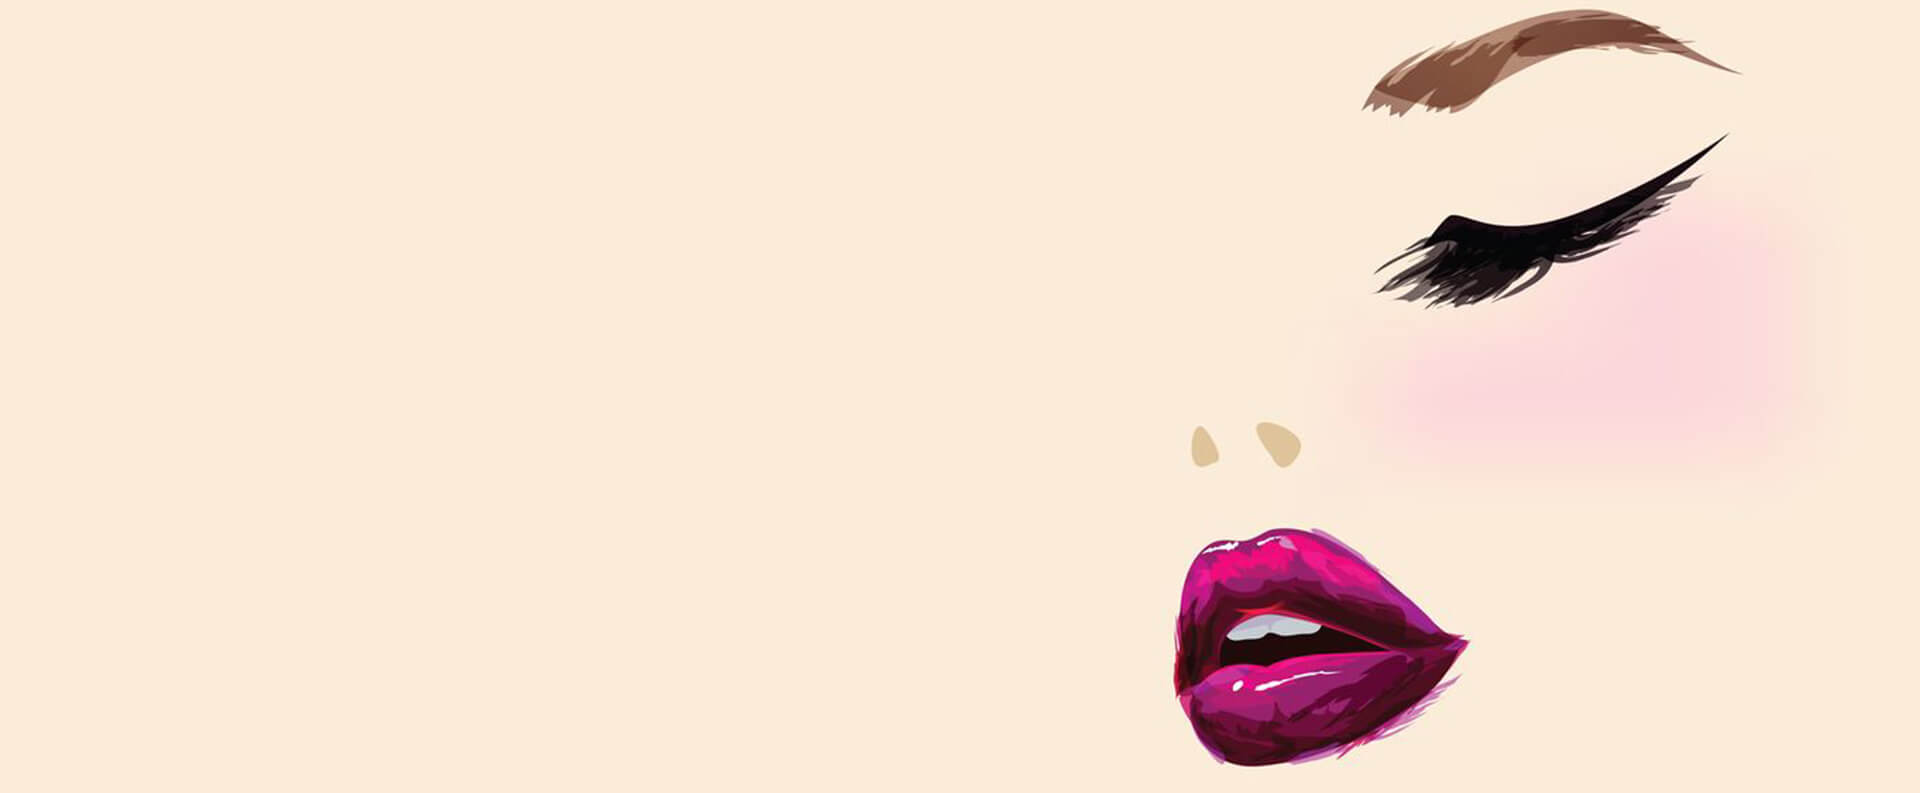 It’s All About The Lips – Here’s Why The World is Going Crazy About Getting The Perfect Pout